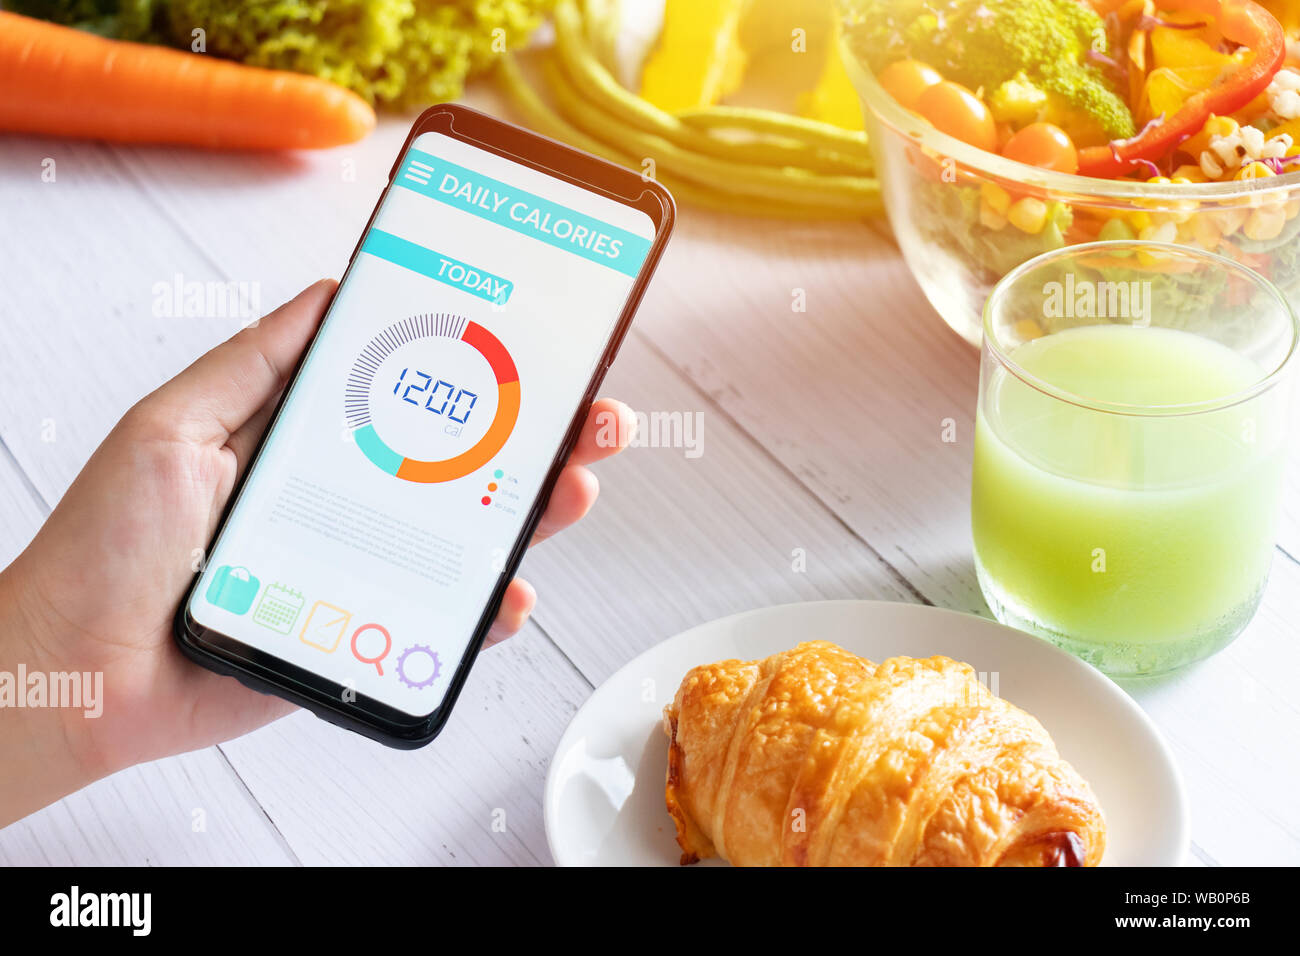 Calories counting and food control concept. woman using Calorie counter application on her smartphone with salad , vegetable, juice and croissant on d Stock Photo